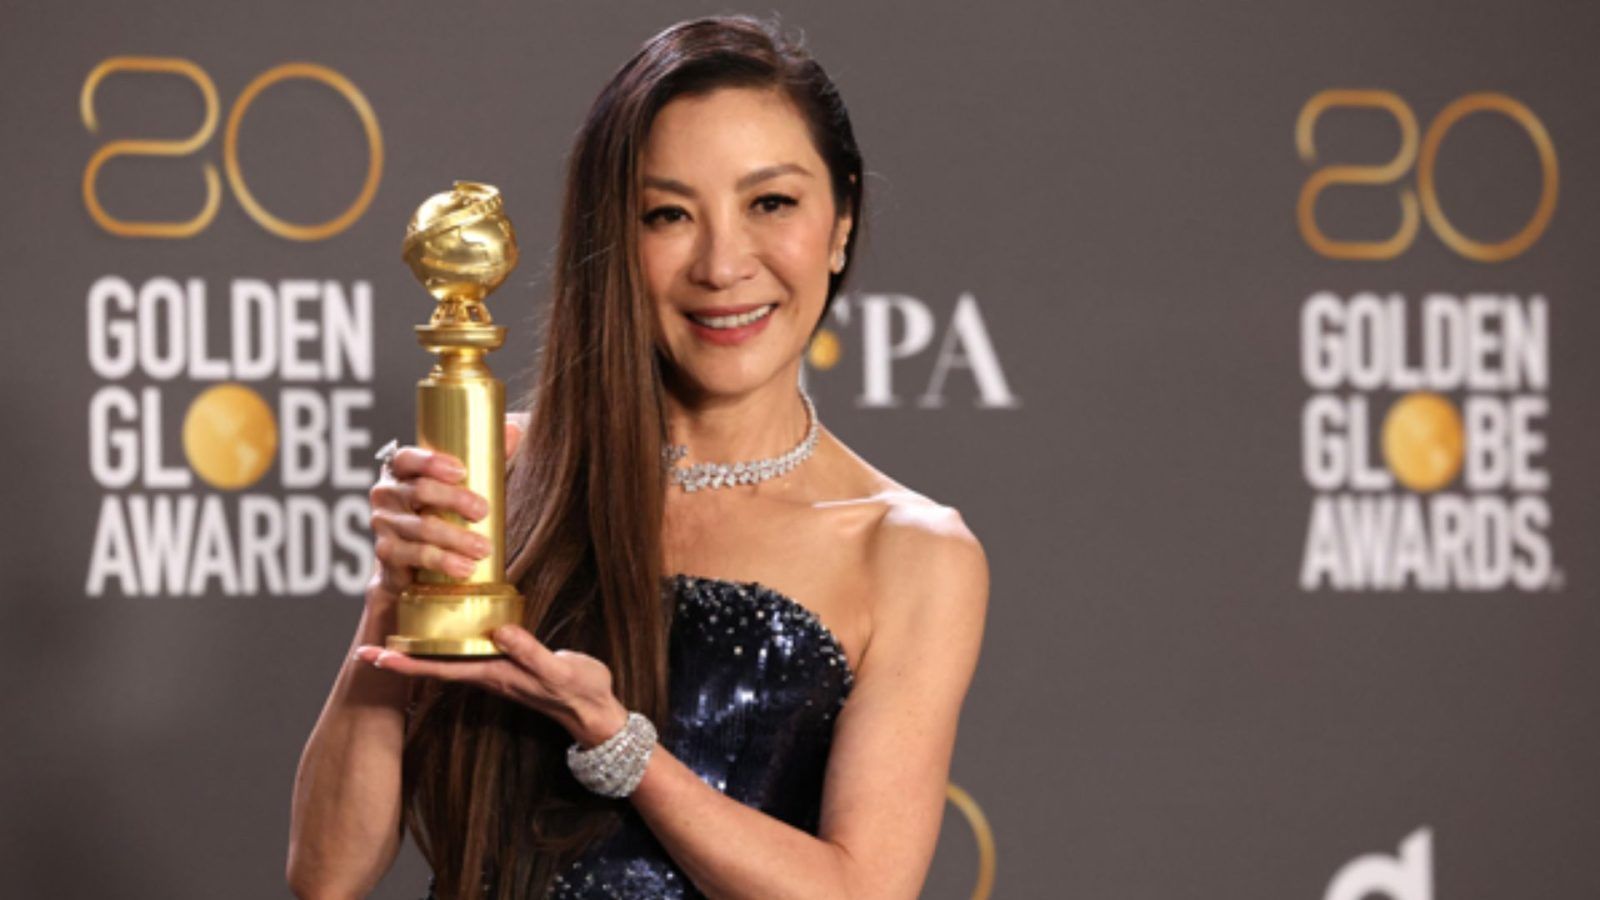 Golden Globes 2023: Winners, best moments and highlights